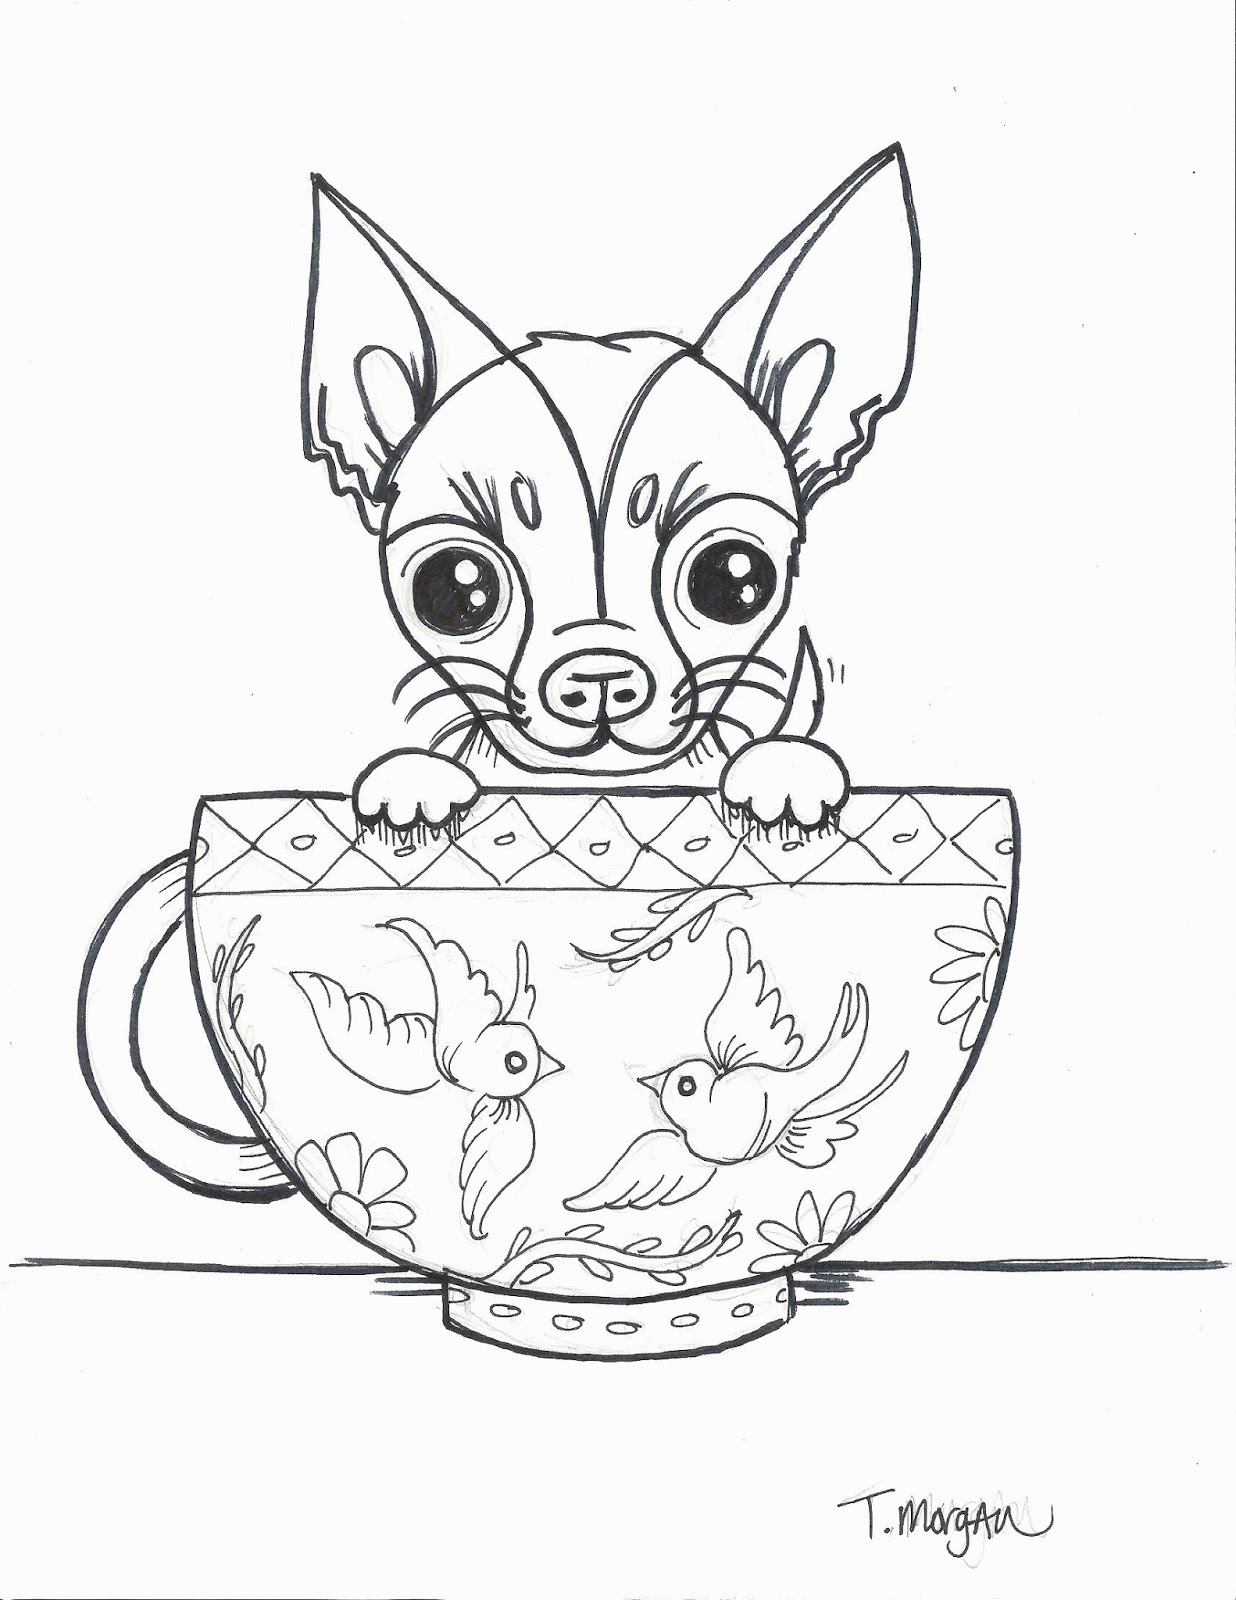 The Lost Sock Teacup Chihuahua